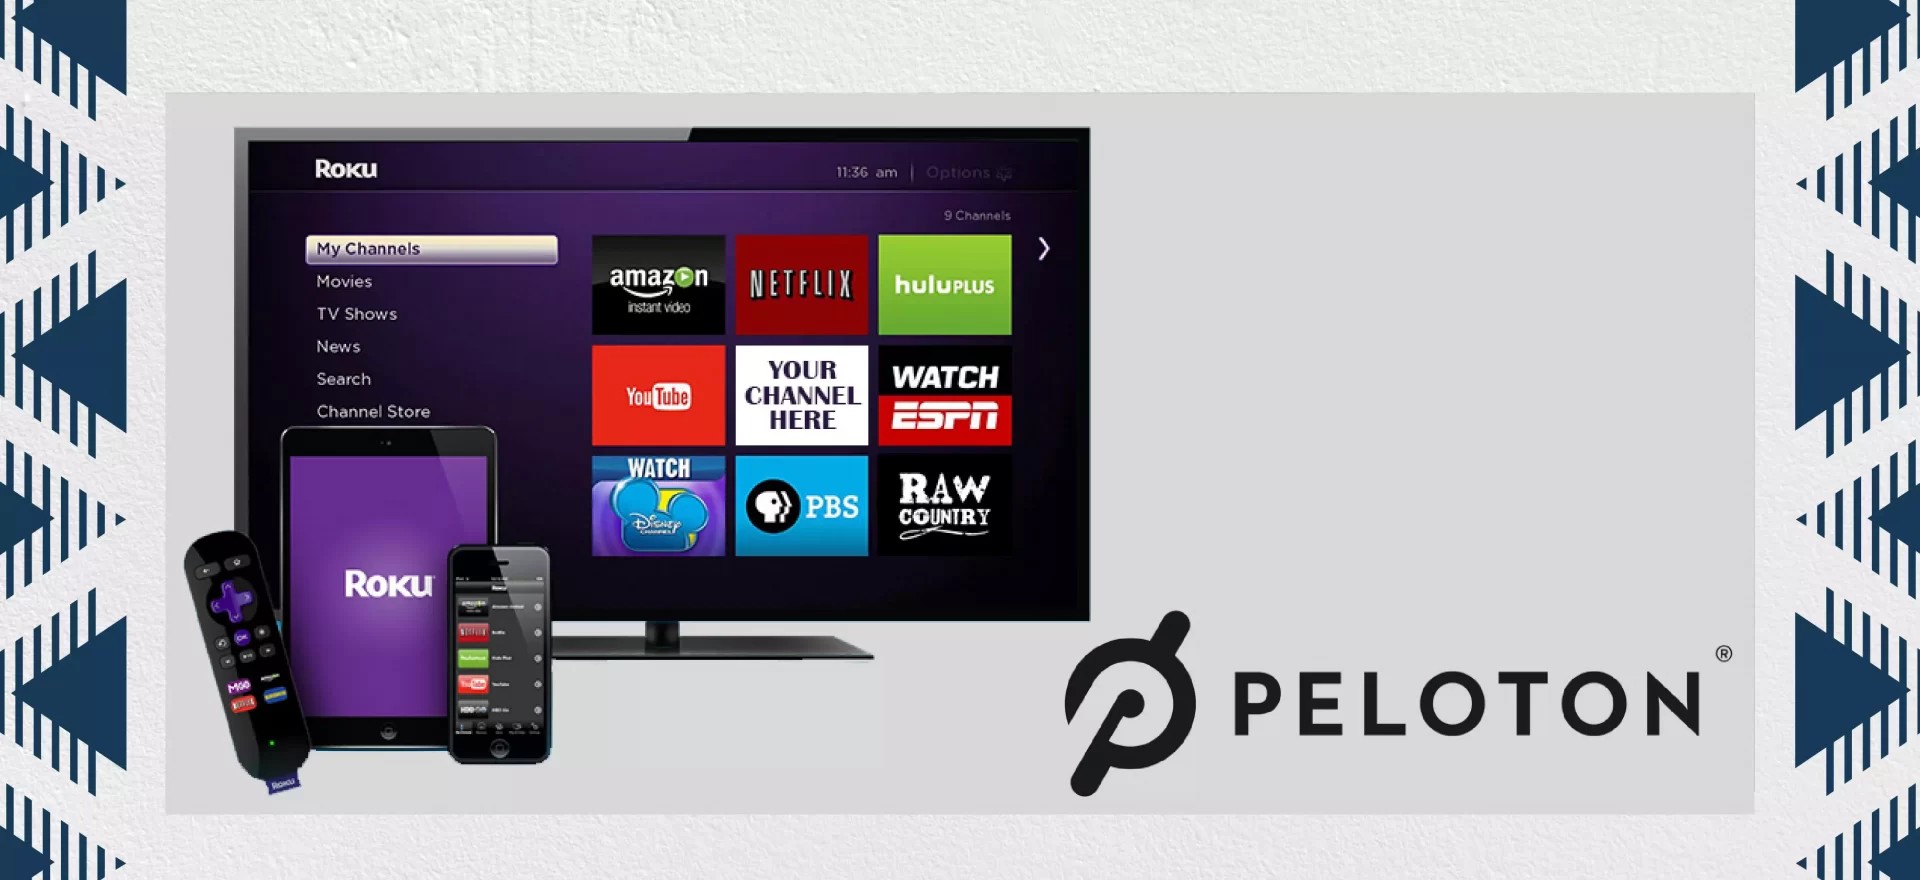 How To Download Peloton On Roku